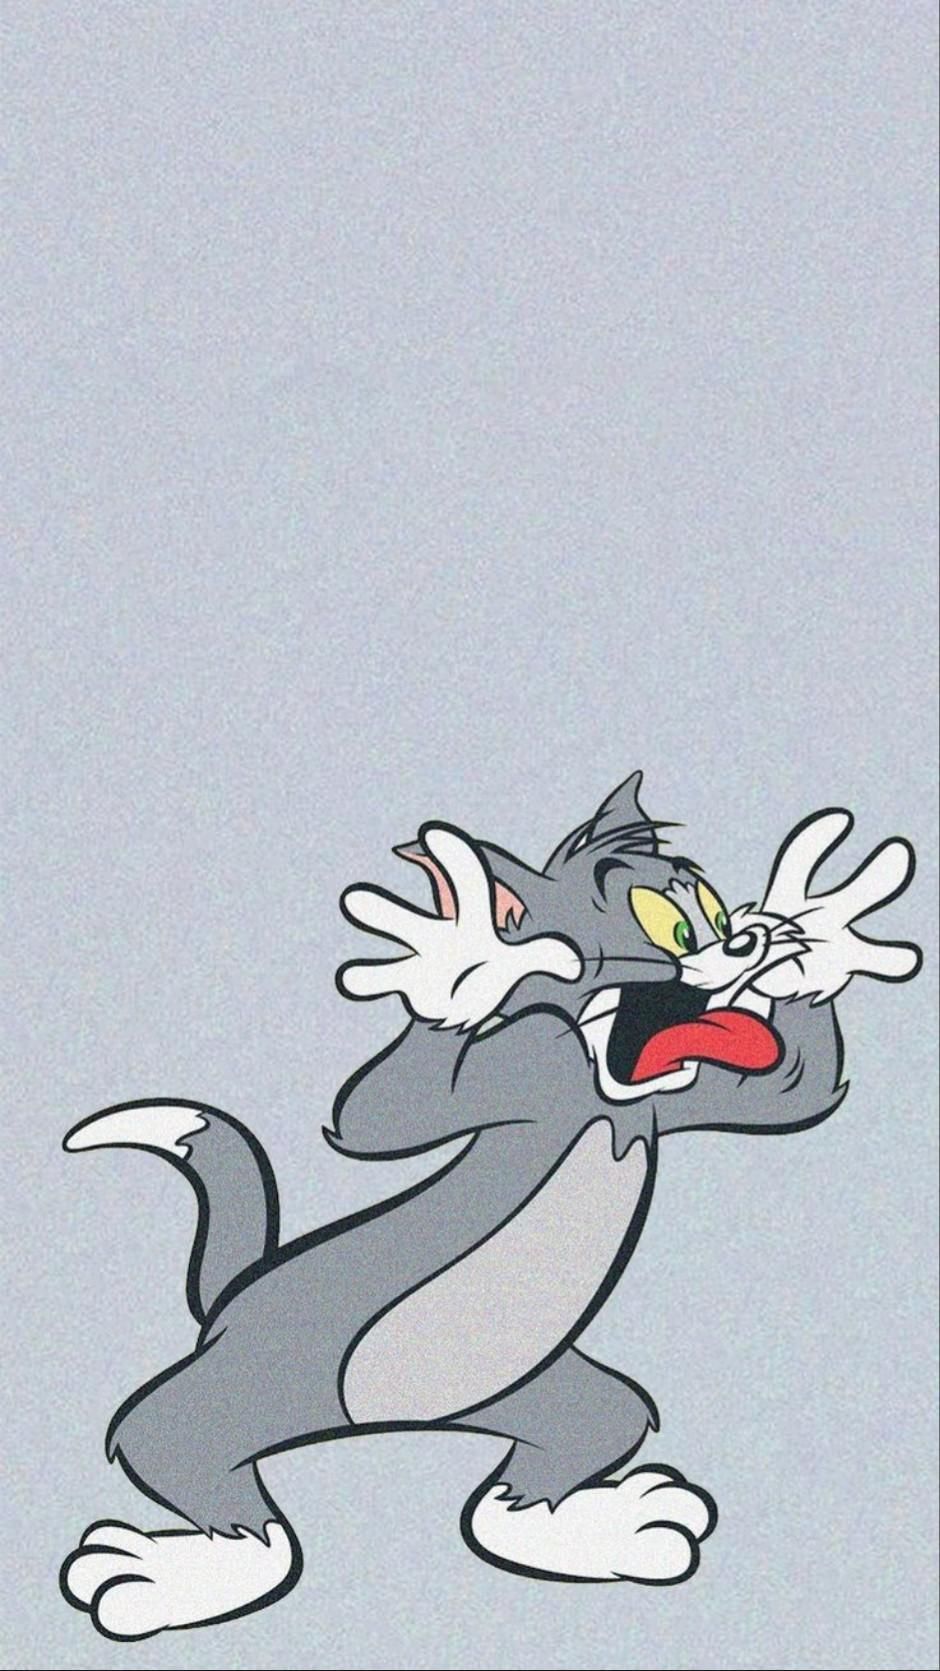 Tom and Jerry iPhone Wallpaper with high-resolution 1080x1920 pixel. You can use this wallpaper for your iPhone 5, 6, 7, 8, X, XS, XR backgrounds, Mobile Screensaver, or iPad Lock Screen - Tom and Jerry